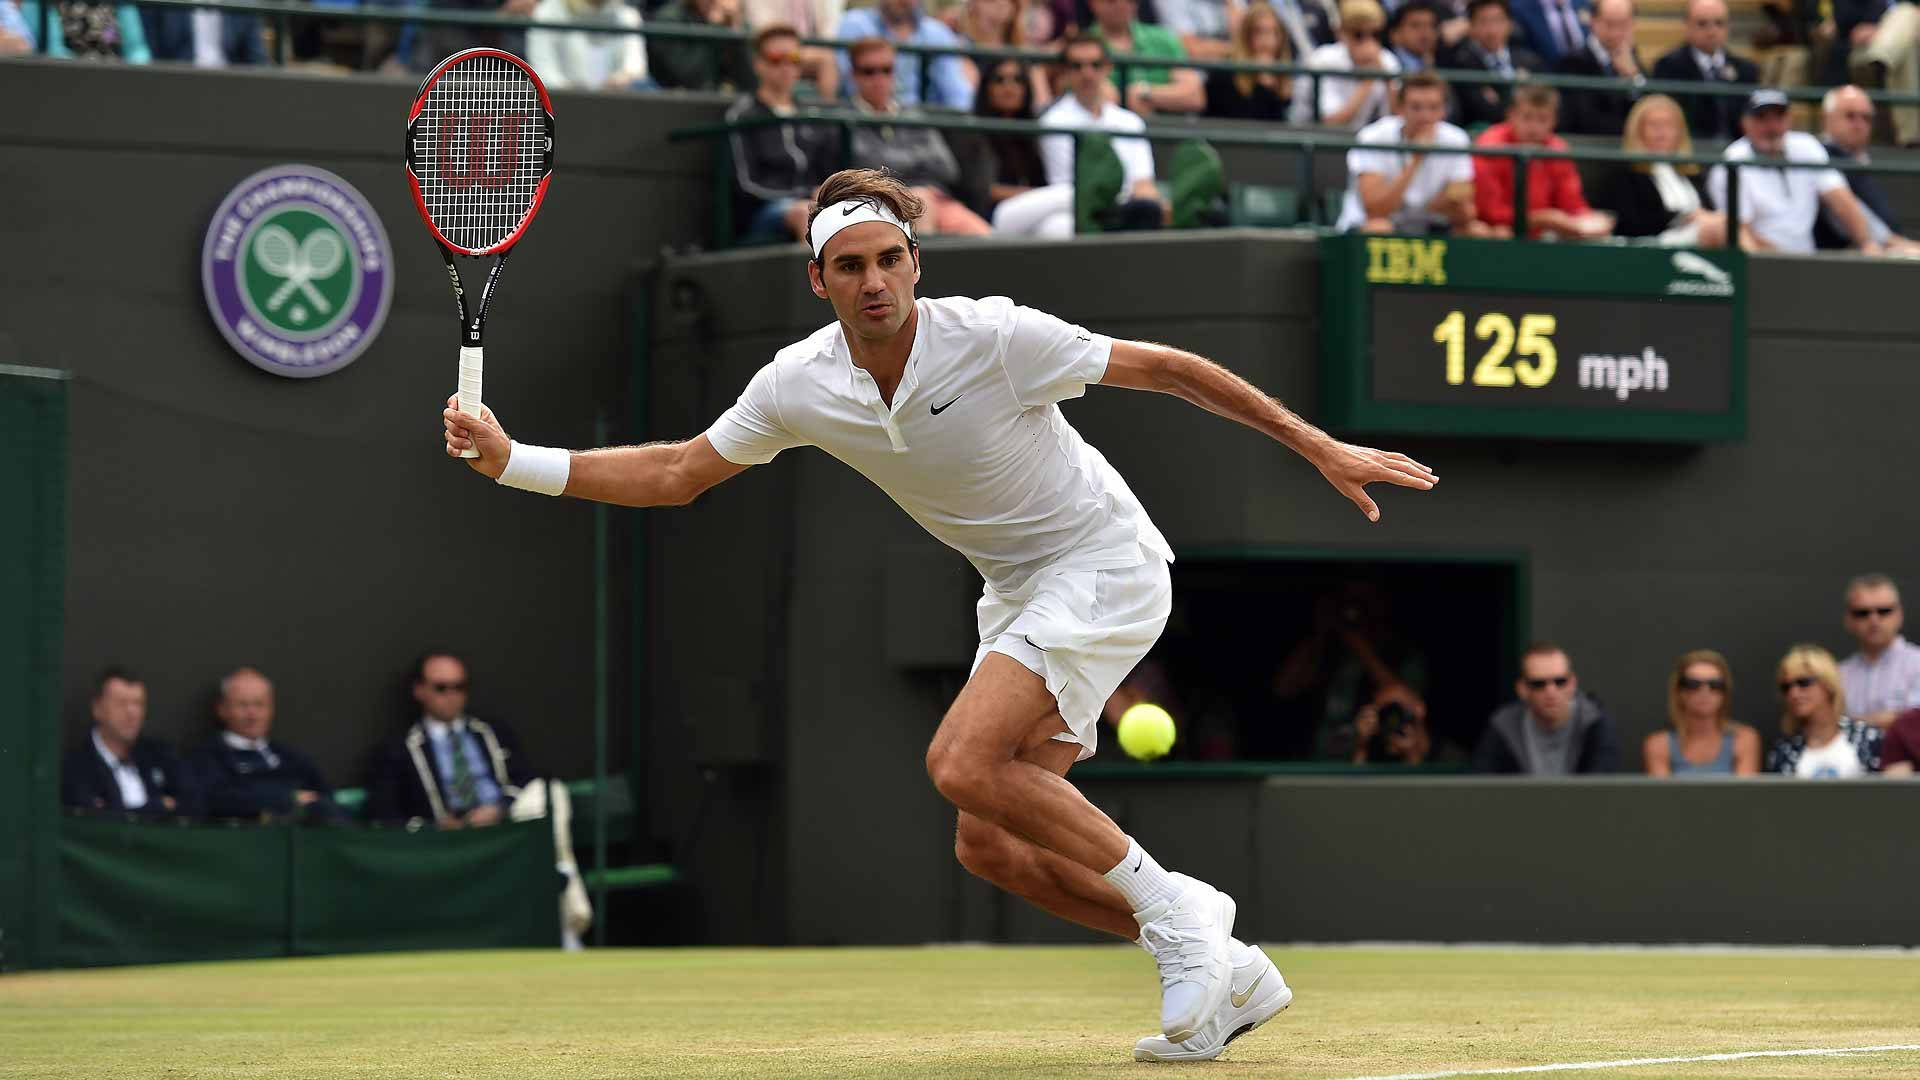 Caption: Roger Federer in Action at the Iconic Wimbledon Court Wallpaper